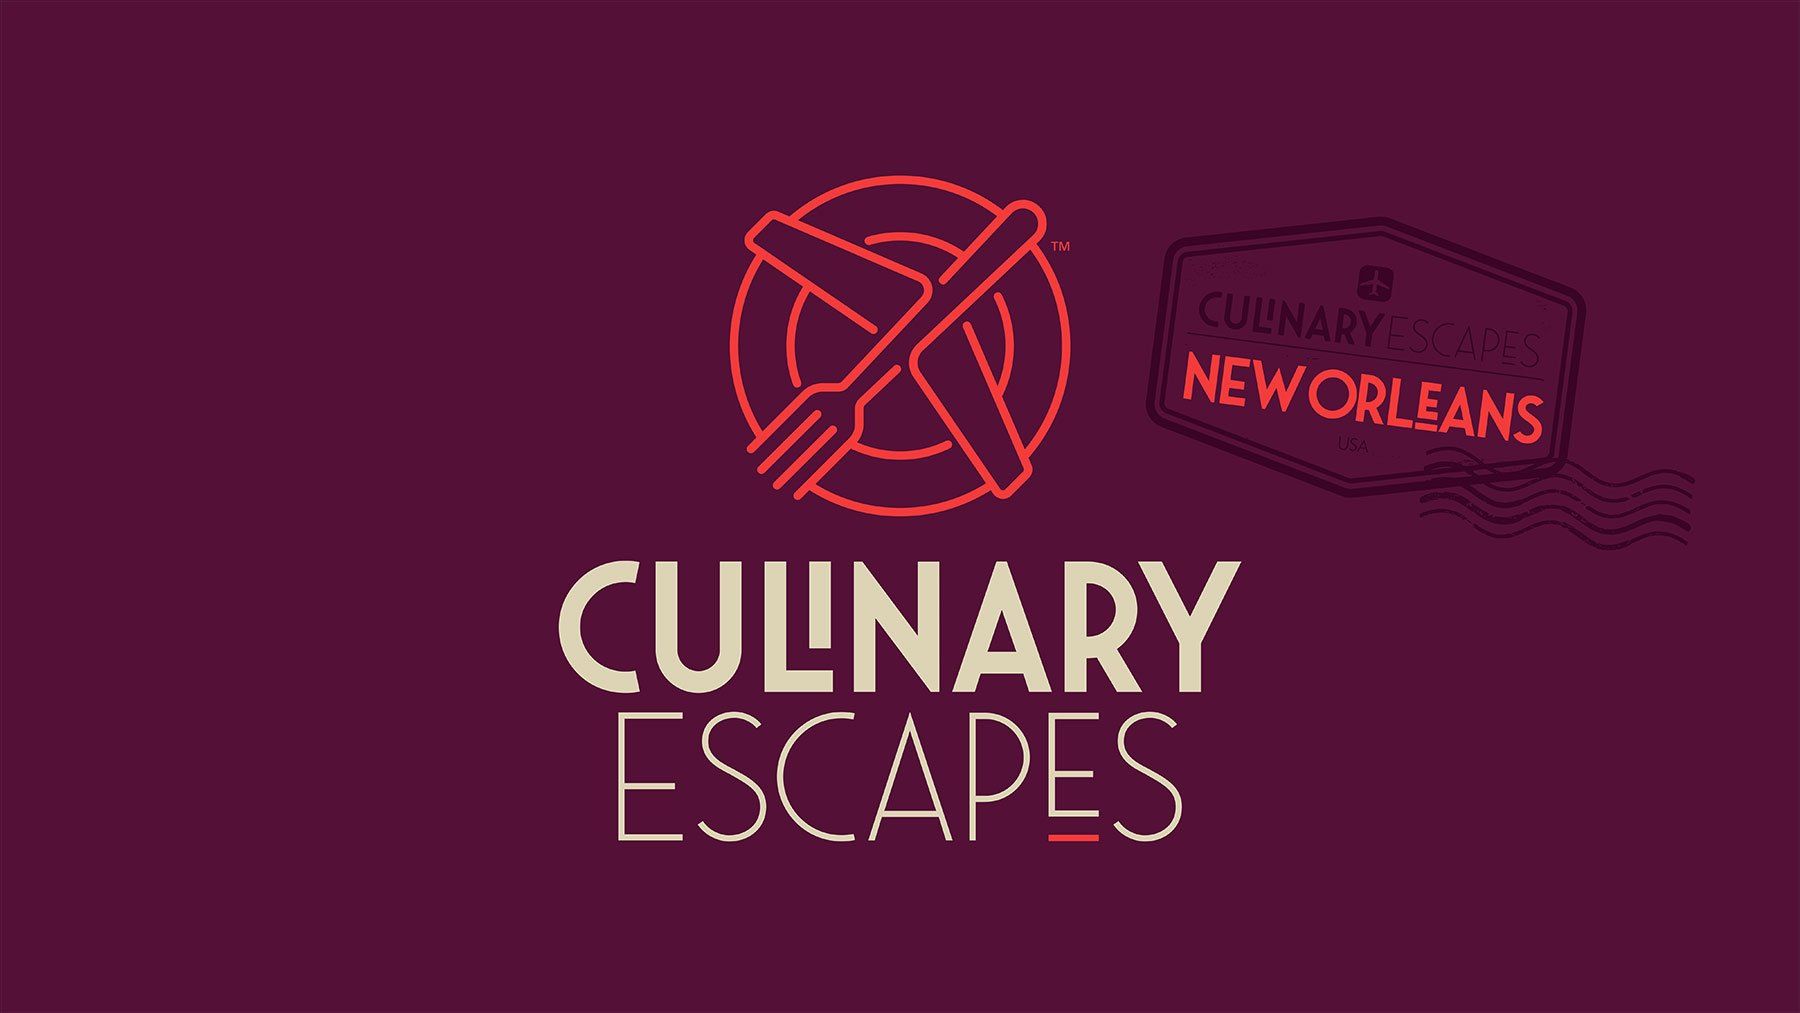 Culinary escapes logo with the stamp of New Orleans on a purple background